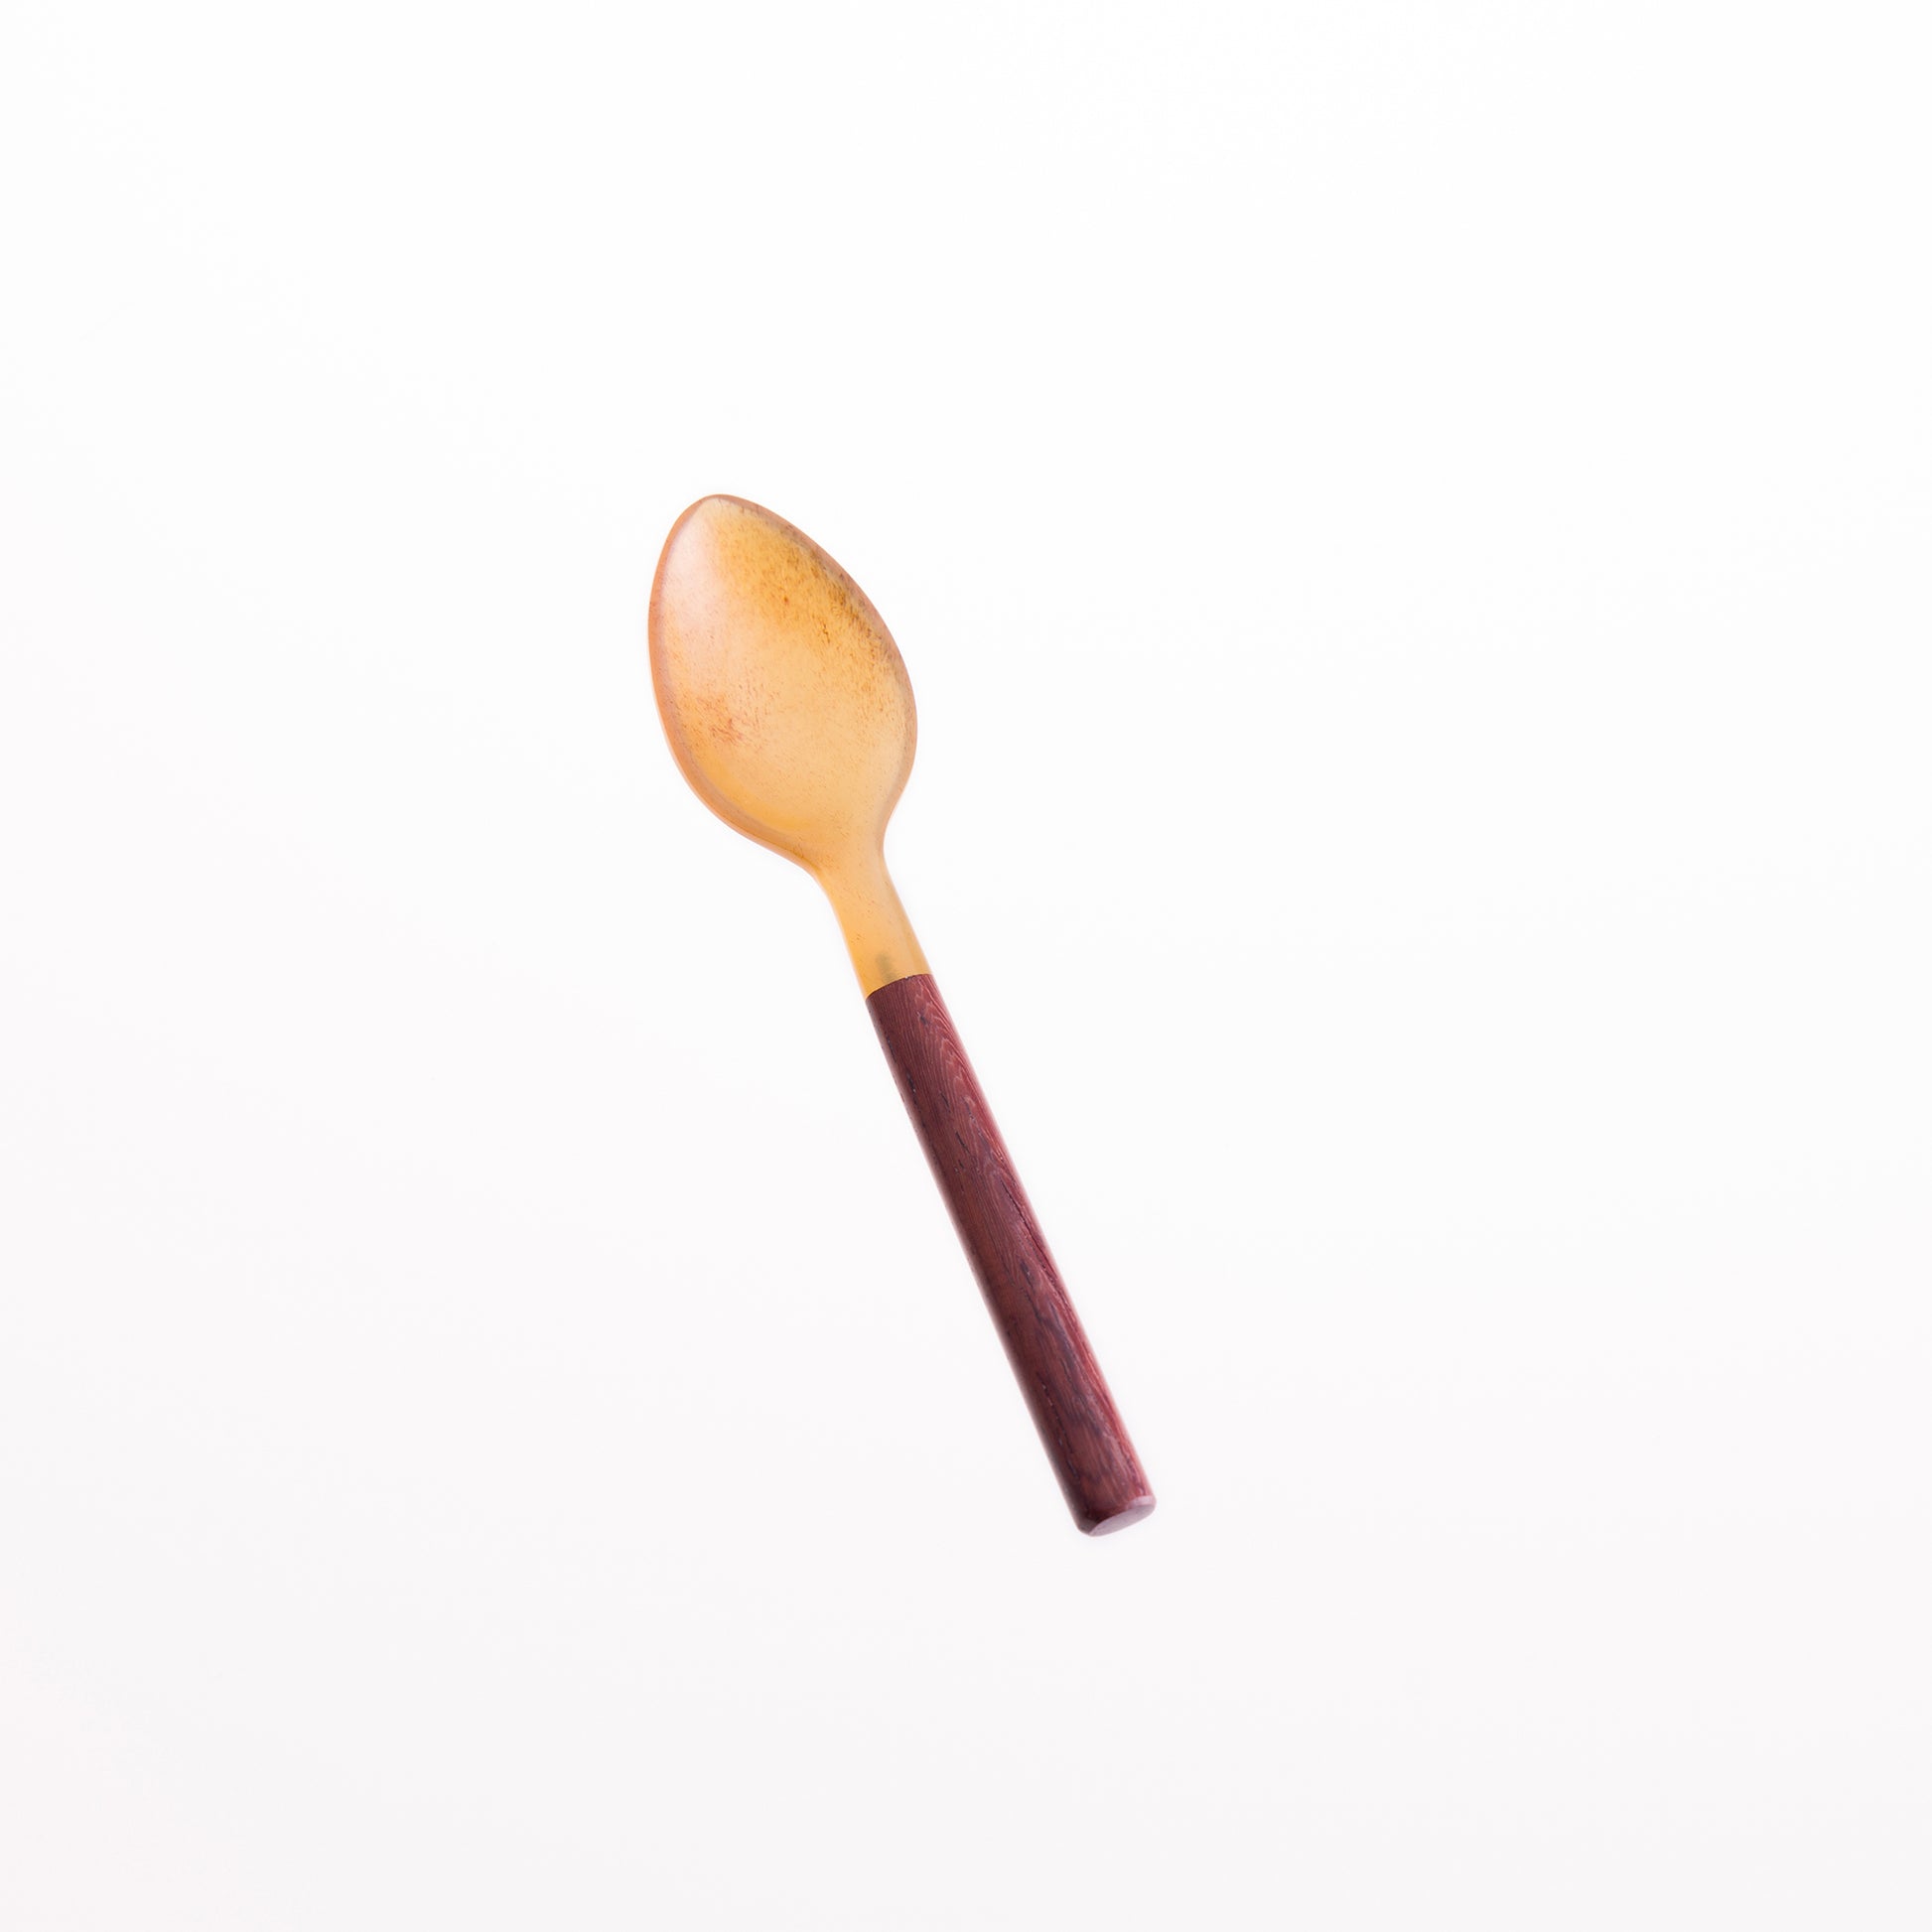 A horn egg spoon, natural horn with a rosewood handle.